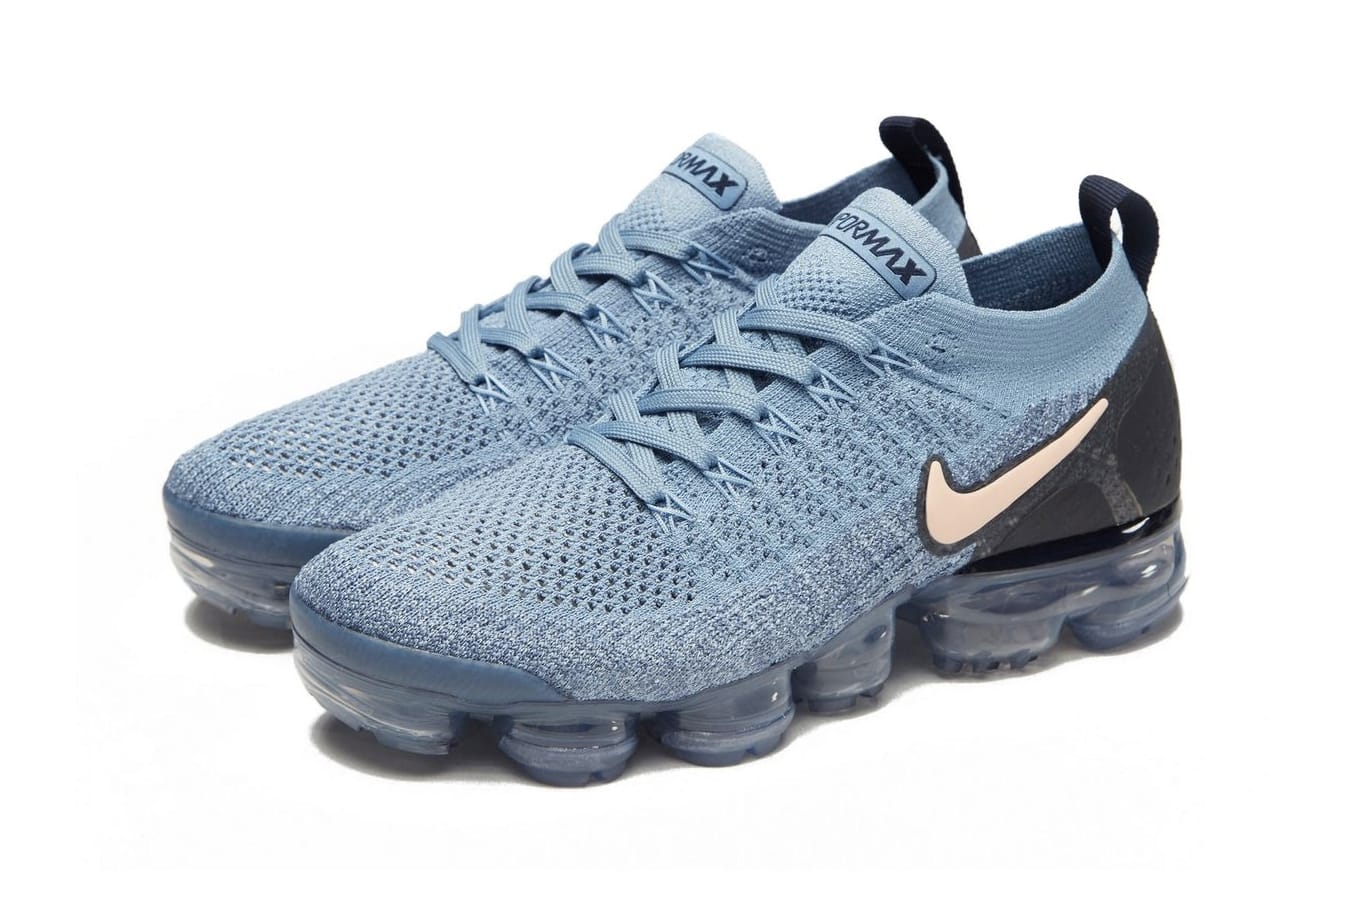 Air VaporMax Flyknit 2.0 in Baby Blue 